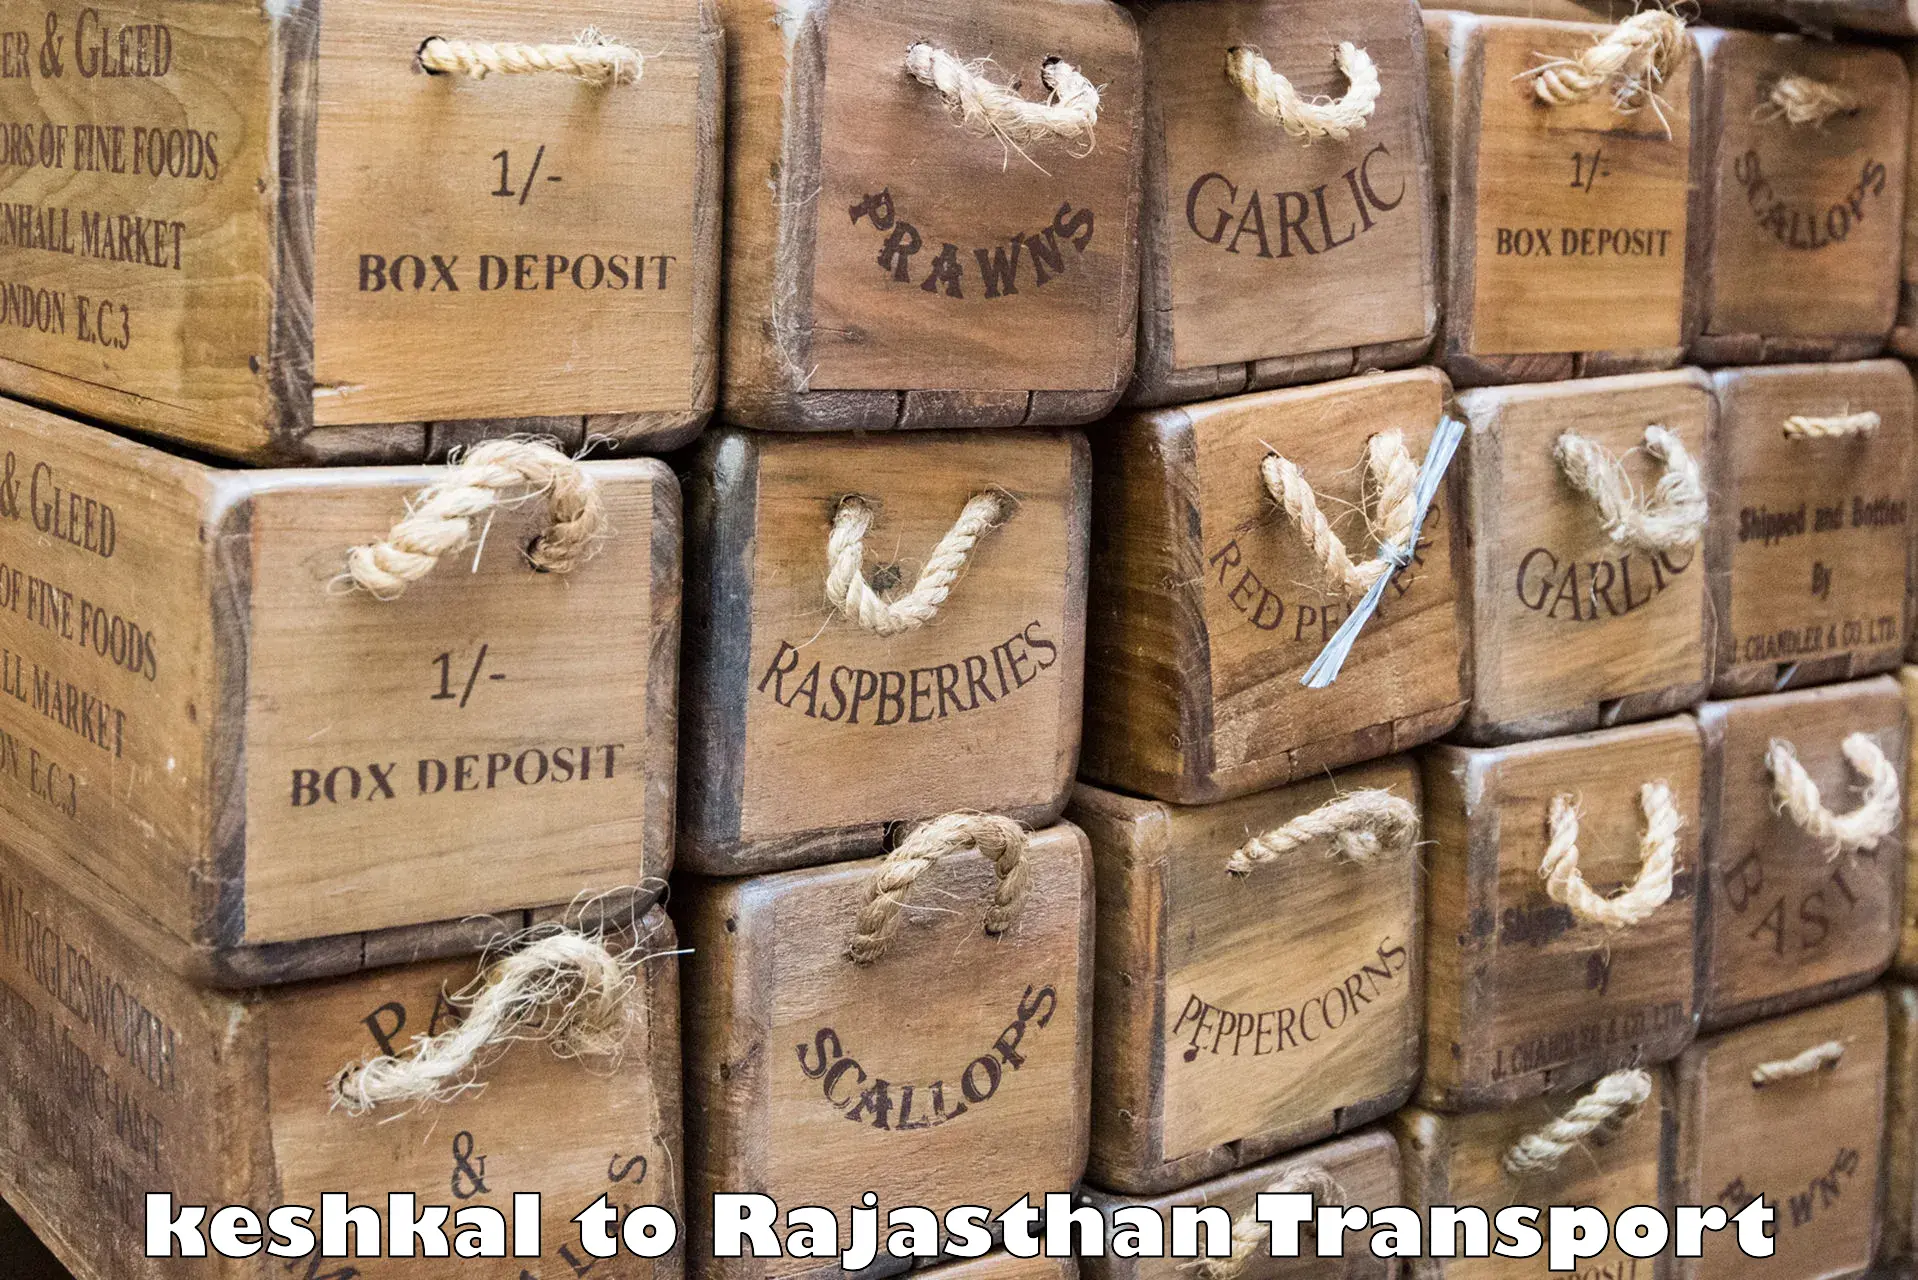 Goods delivery service keshkal to Udaipur